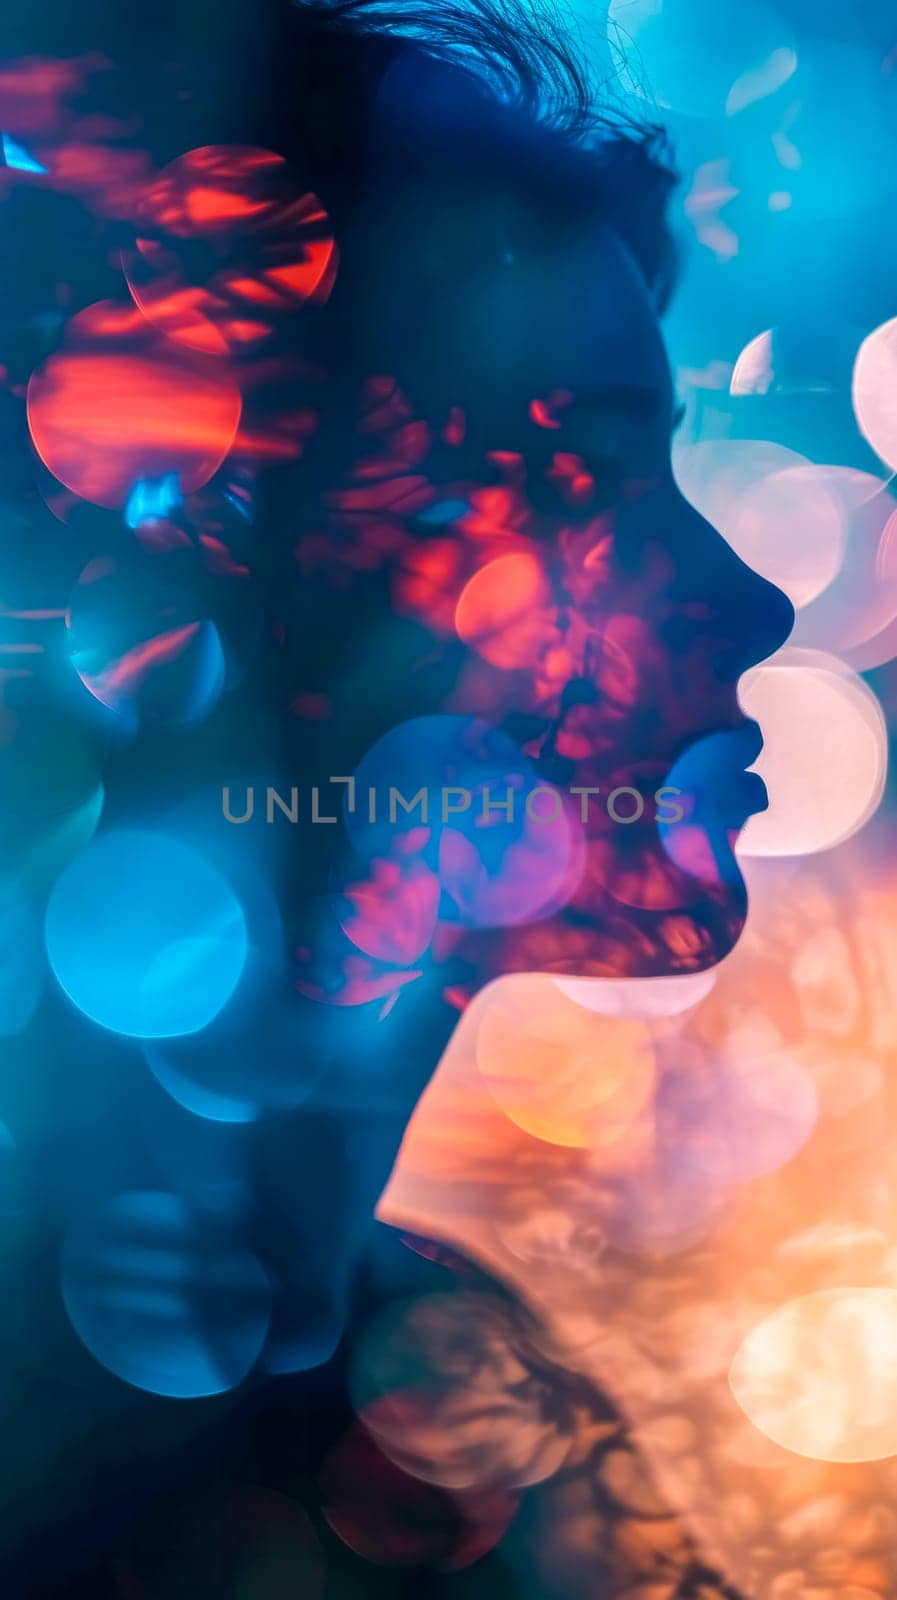 profile of a person overlaid with a vibrant array of bokeh lights in blue and red hues, creating a captivating and ethereal visual effect that's both mysterious and artistic by Edophoto